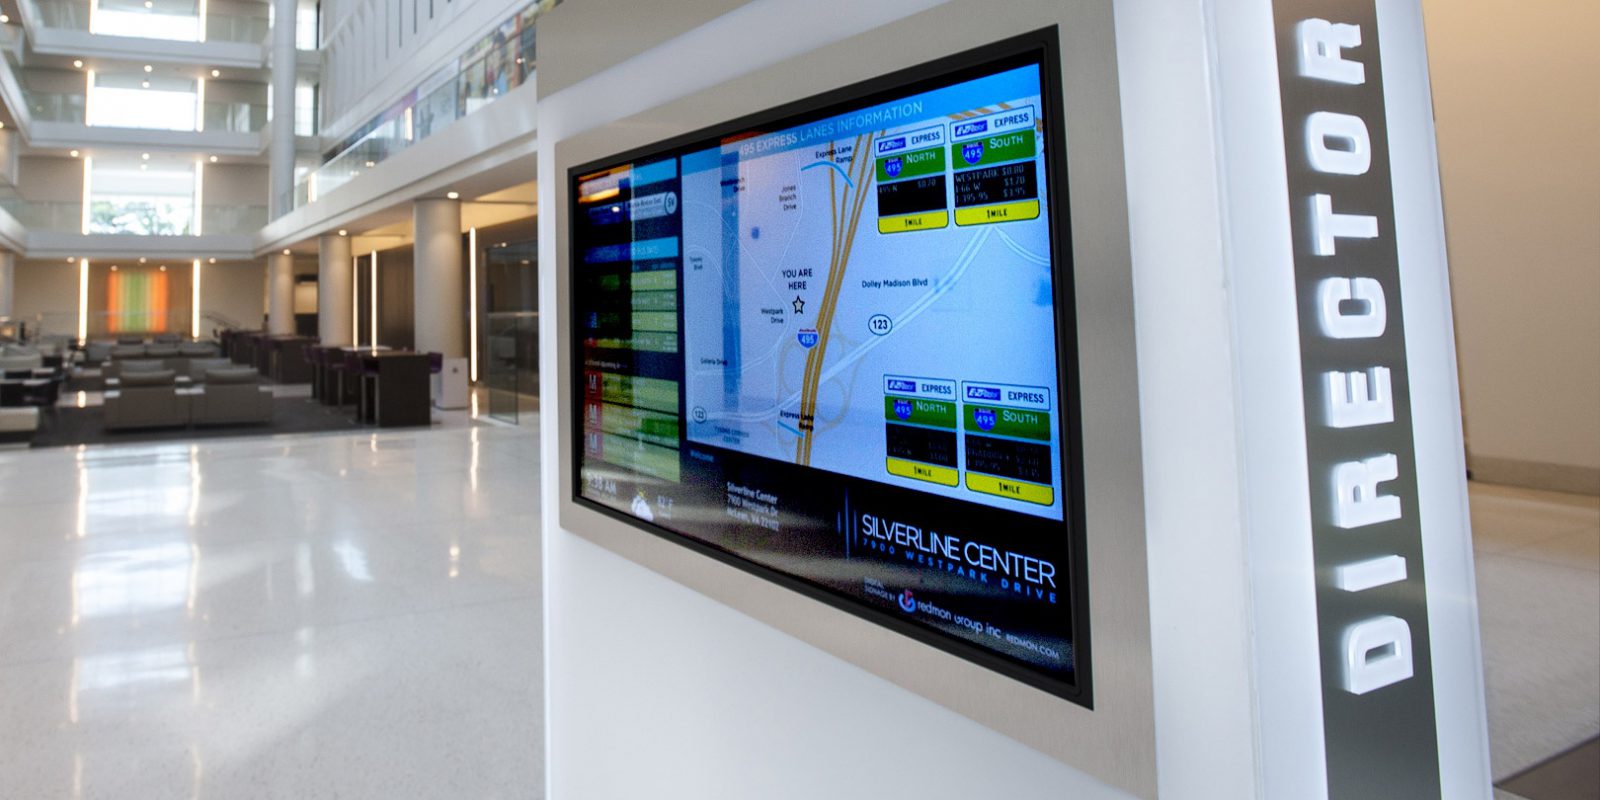 Image of a Transit Display at Washington Real Estate Investment Trust 